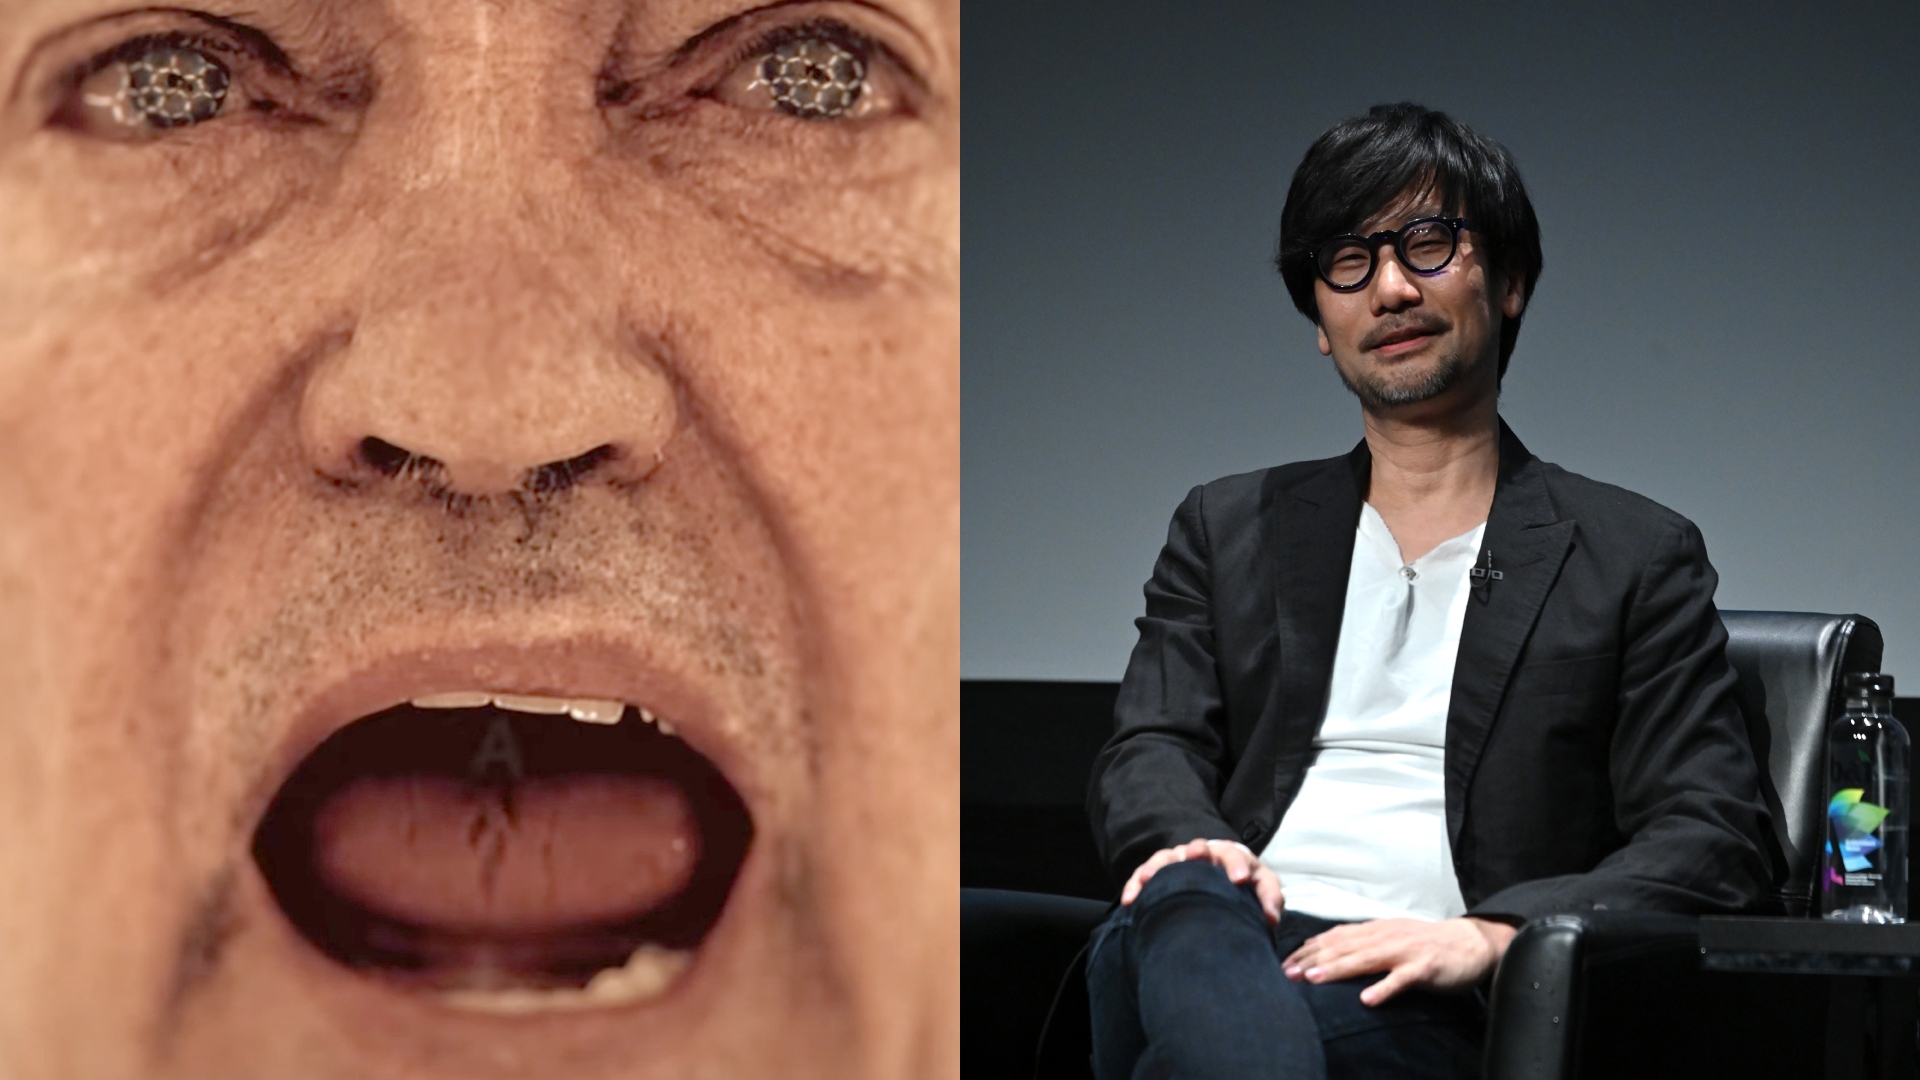 Hideo Kojima's OD trailer from The Game Awards nods to Silent Hill